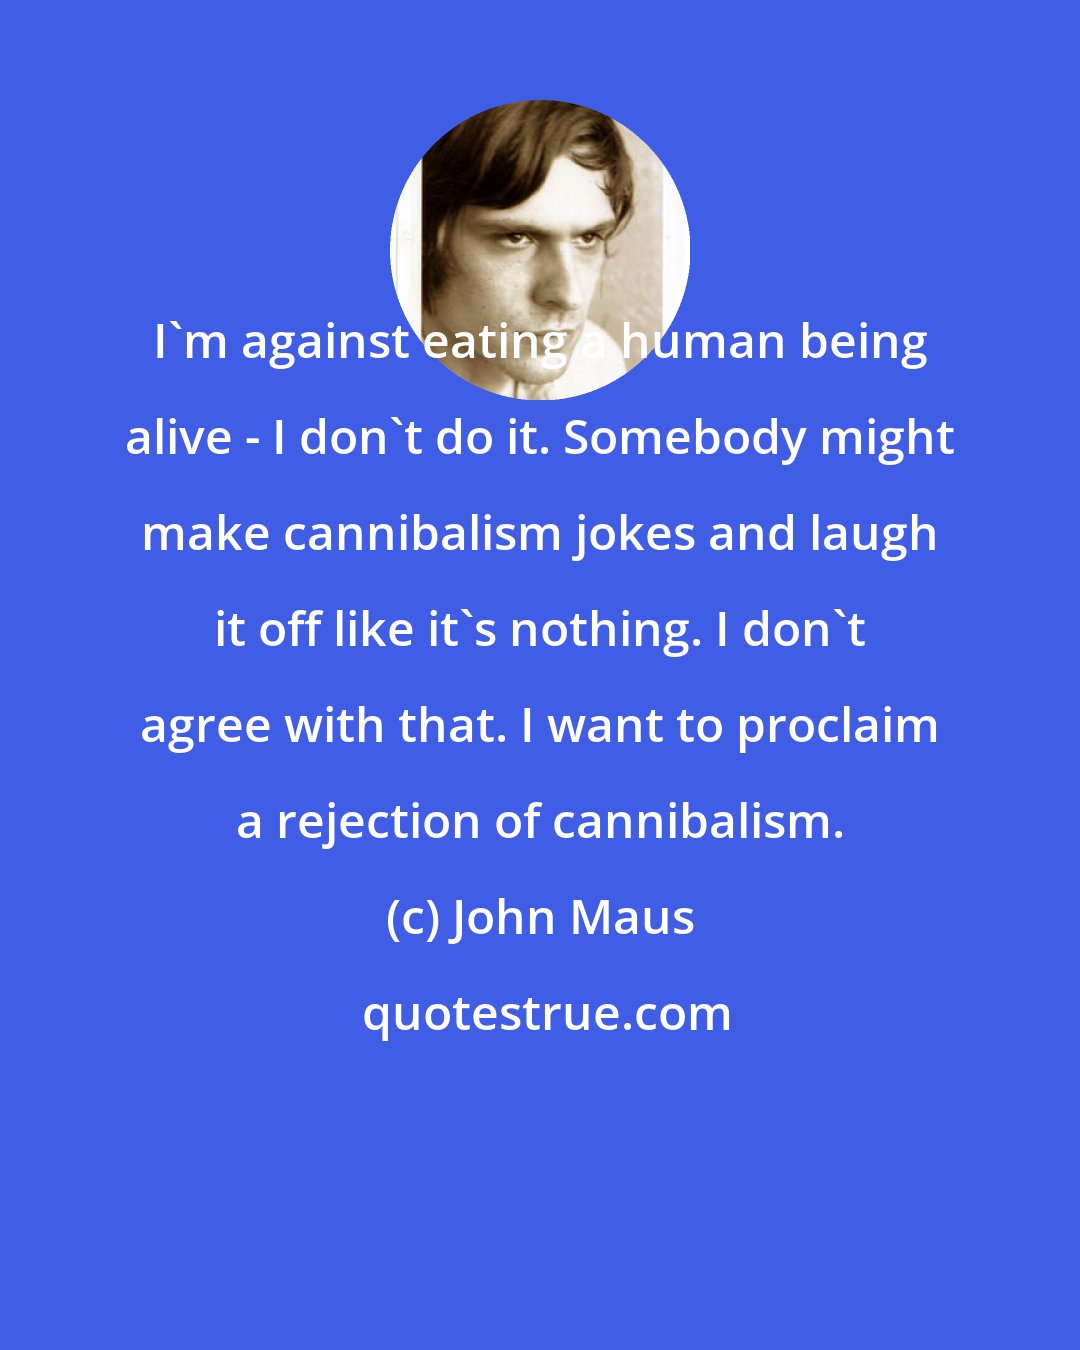 John Maus: I'm against eating a human being alive - I don't do it. Somebody might make cannibalism jokes and laugh it off like it's nothing. I don't agree with that. I want to proclaim a rejection of cannibalism.